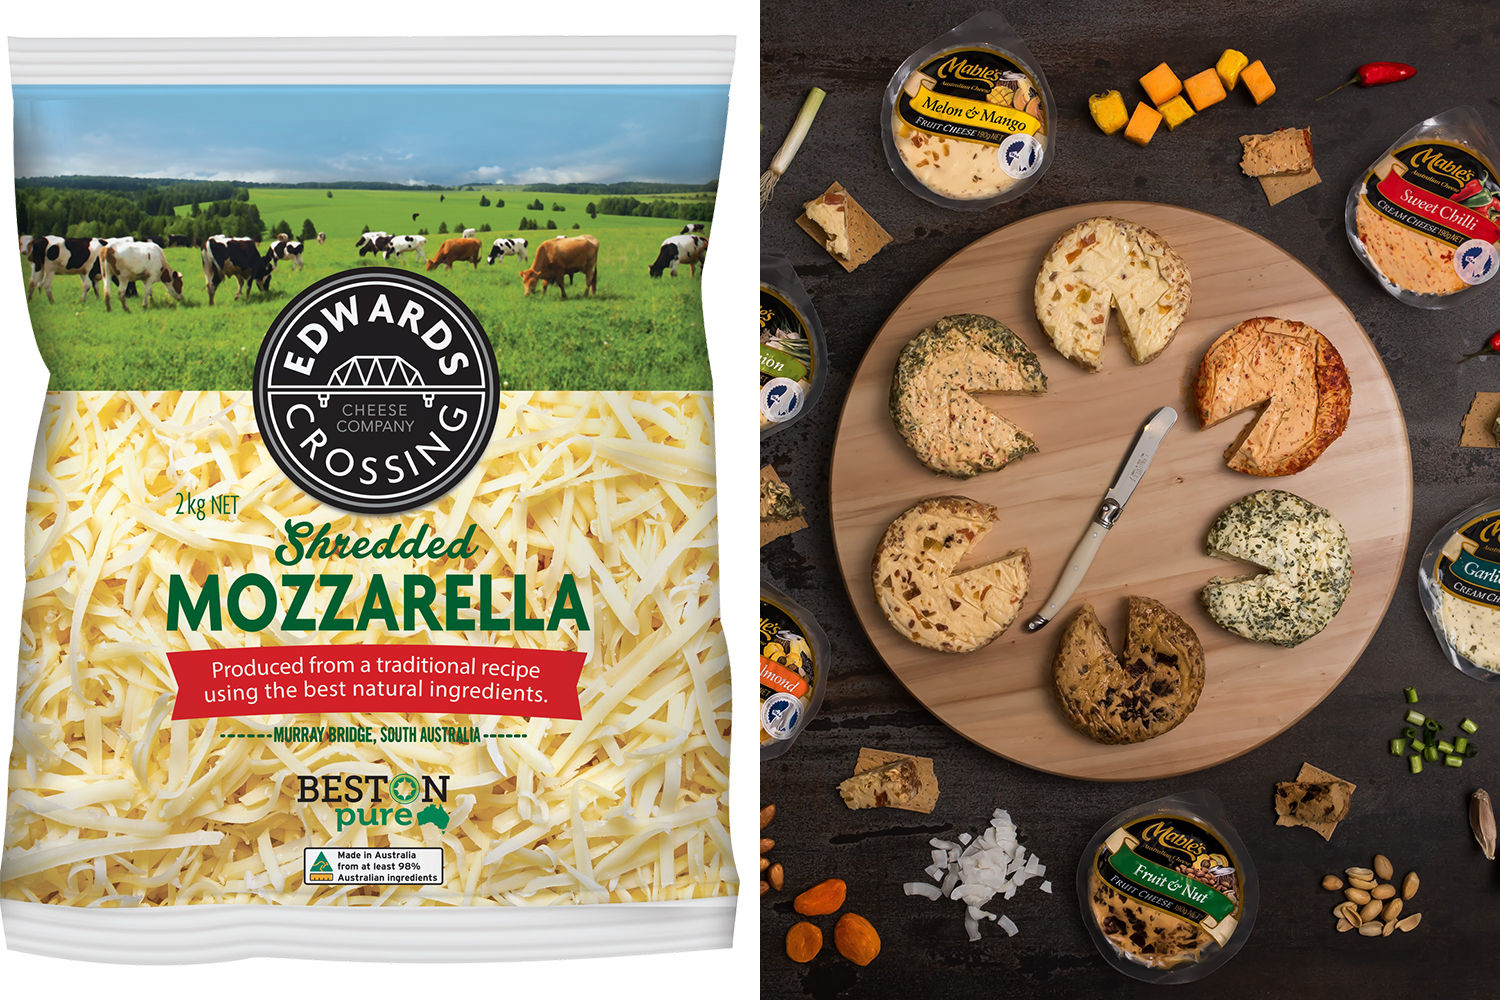 Packet of shredded mozzarella and gourmet cheese board